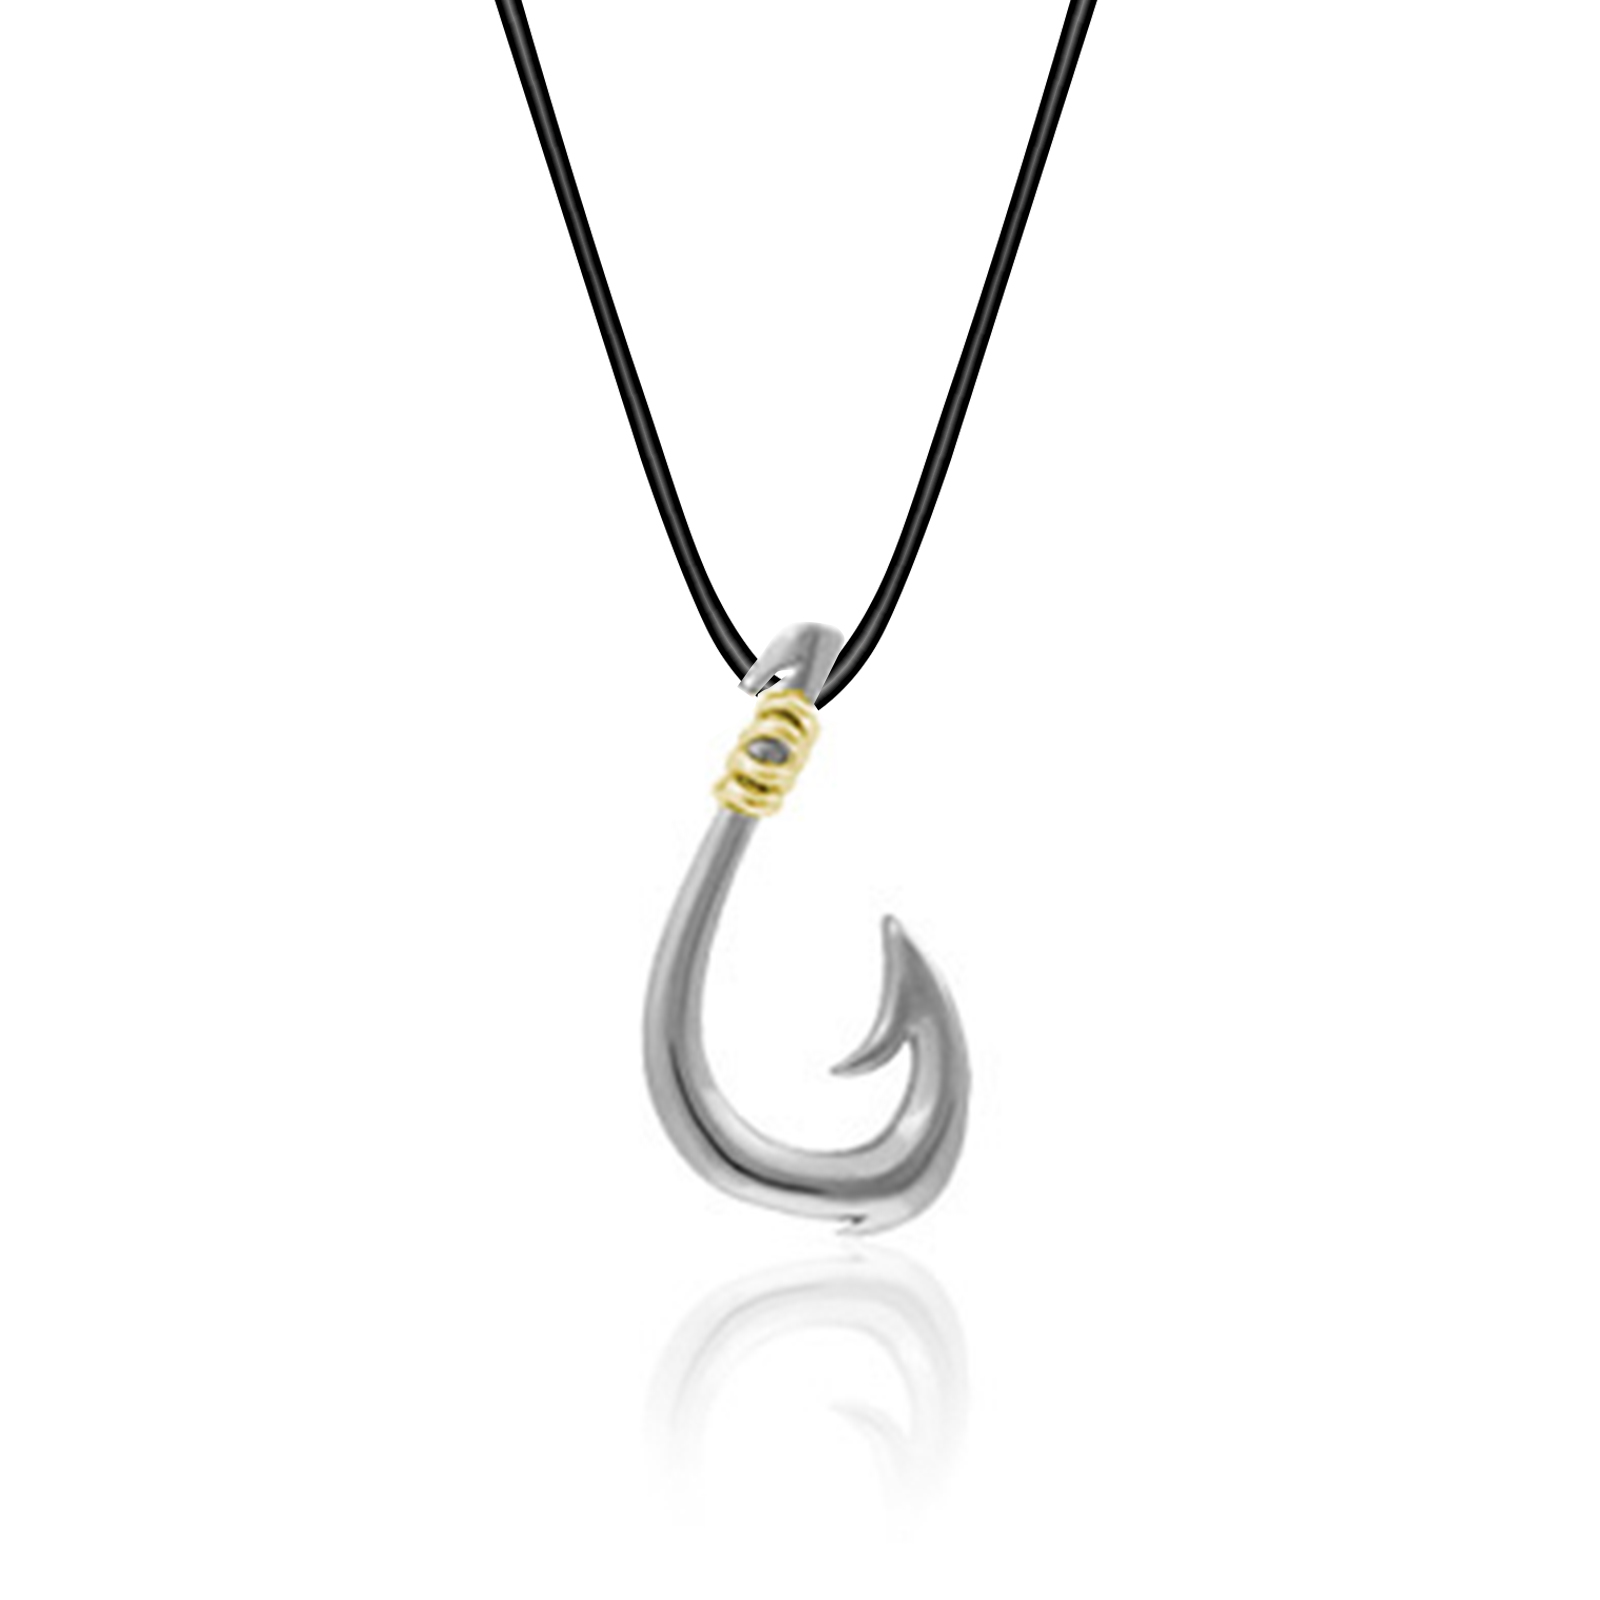 Fishhook Two Tone Silver and Gold Pendant Necklace